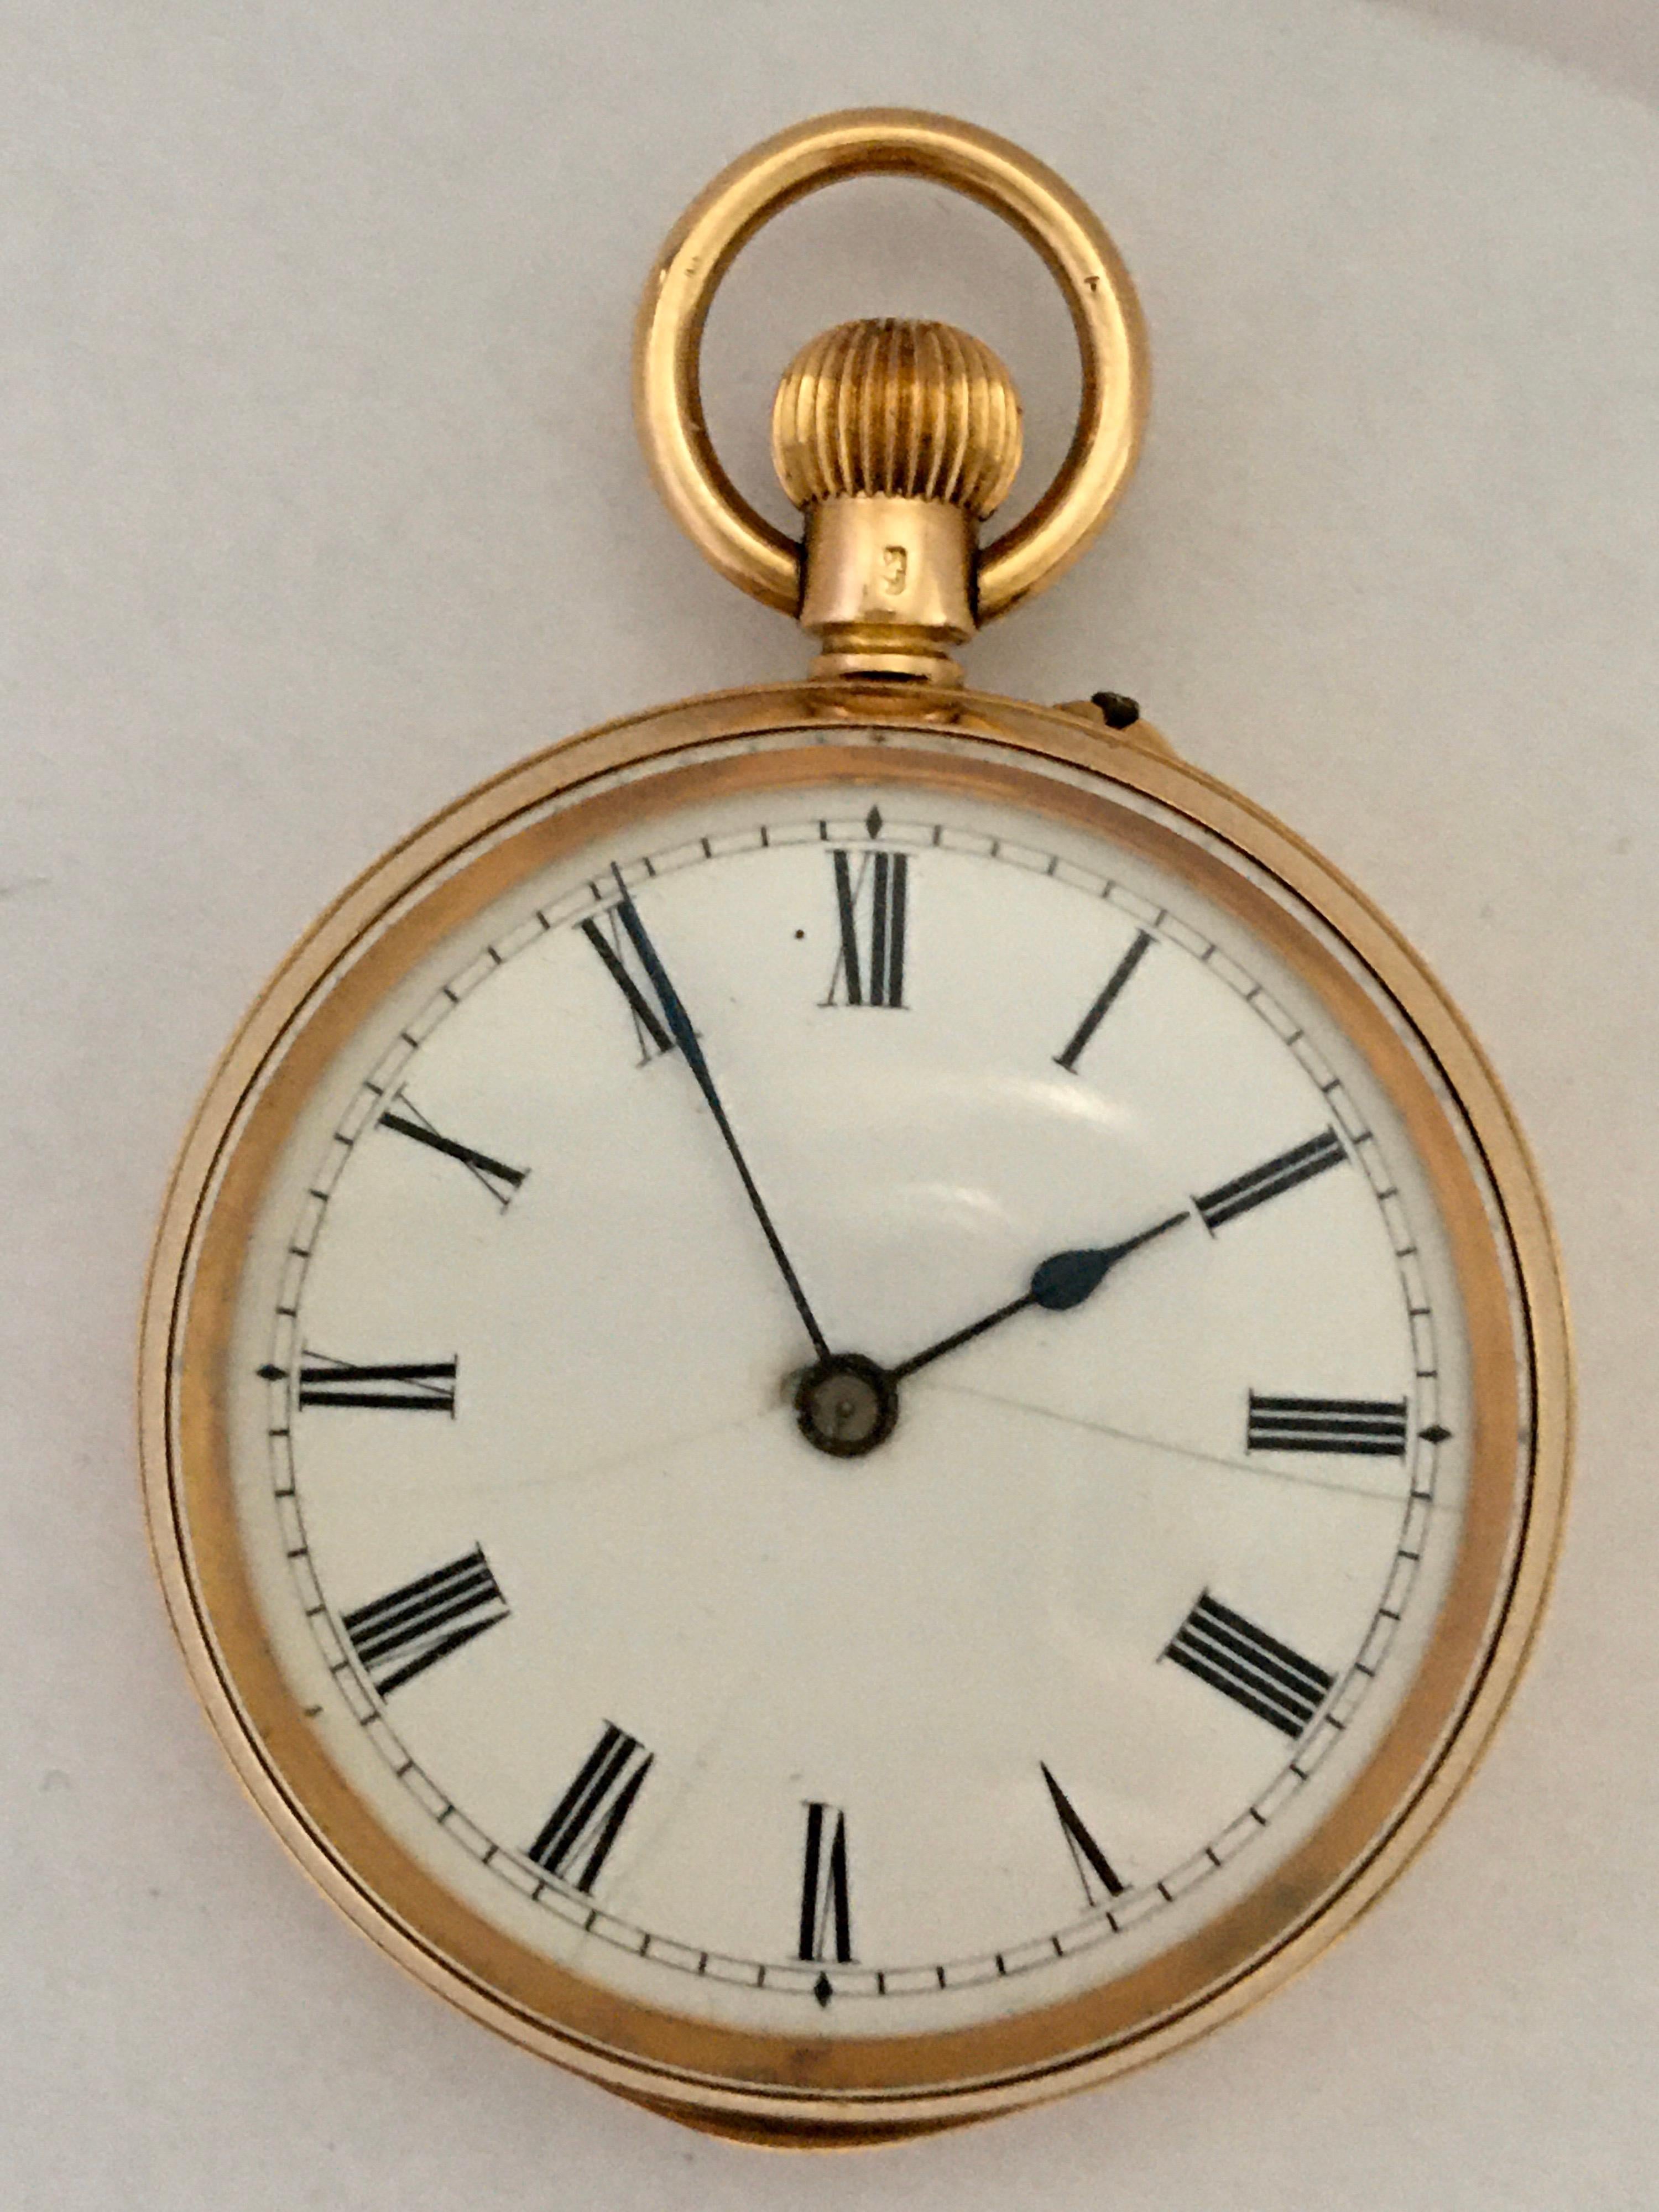 This beautiful 35mm diameter antique hand-winding gold pocket watch is in good working condition and it is ticking well. Visible signs ageing and wear with some hairline cracks on the dial as shown. This watch weigh 38.6 grams 

Please study the